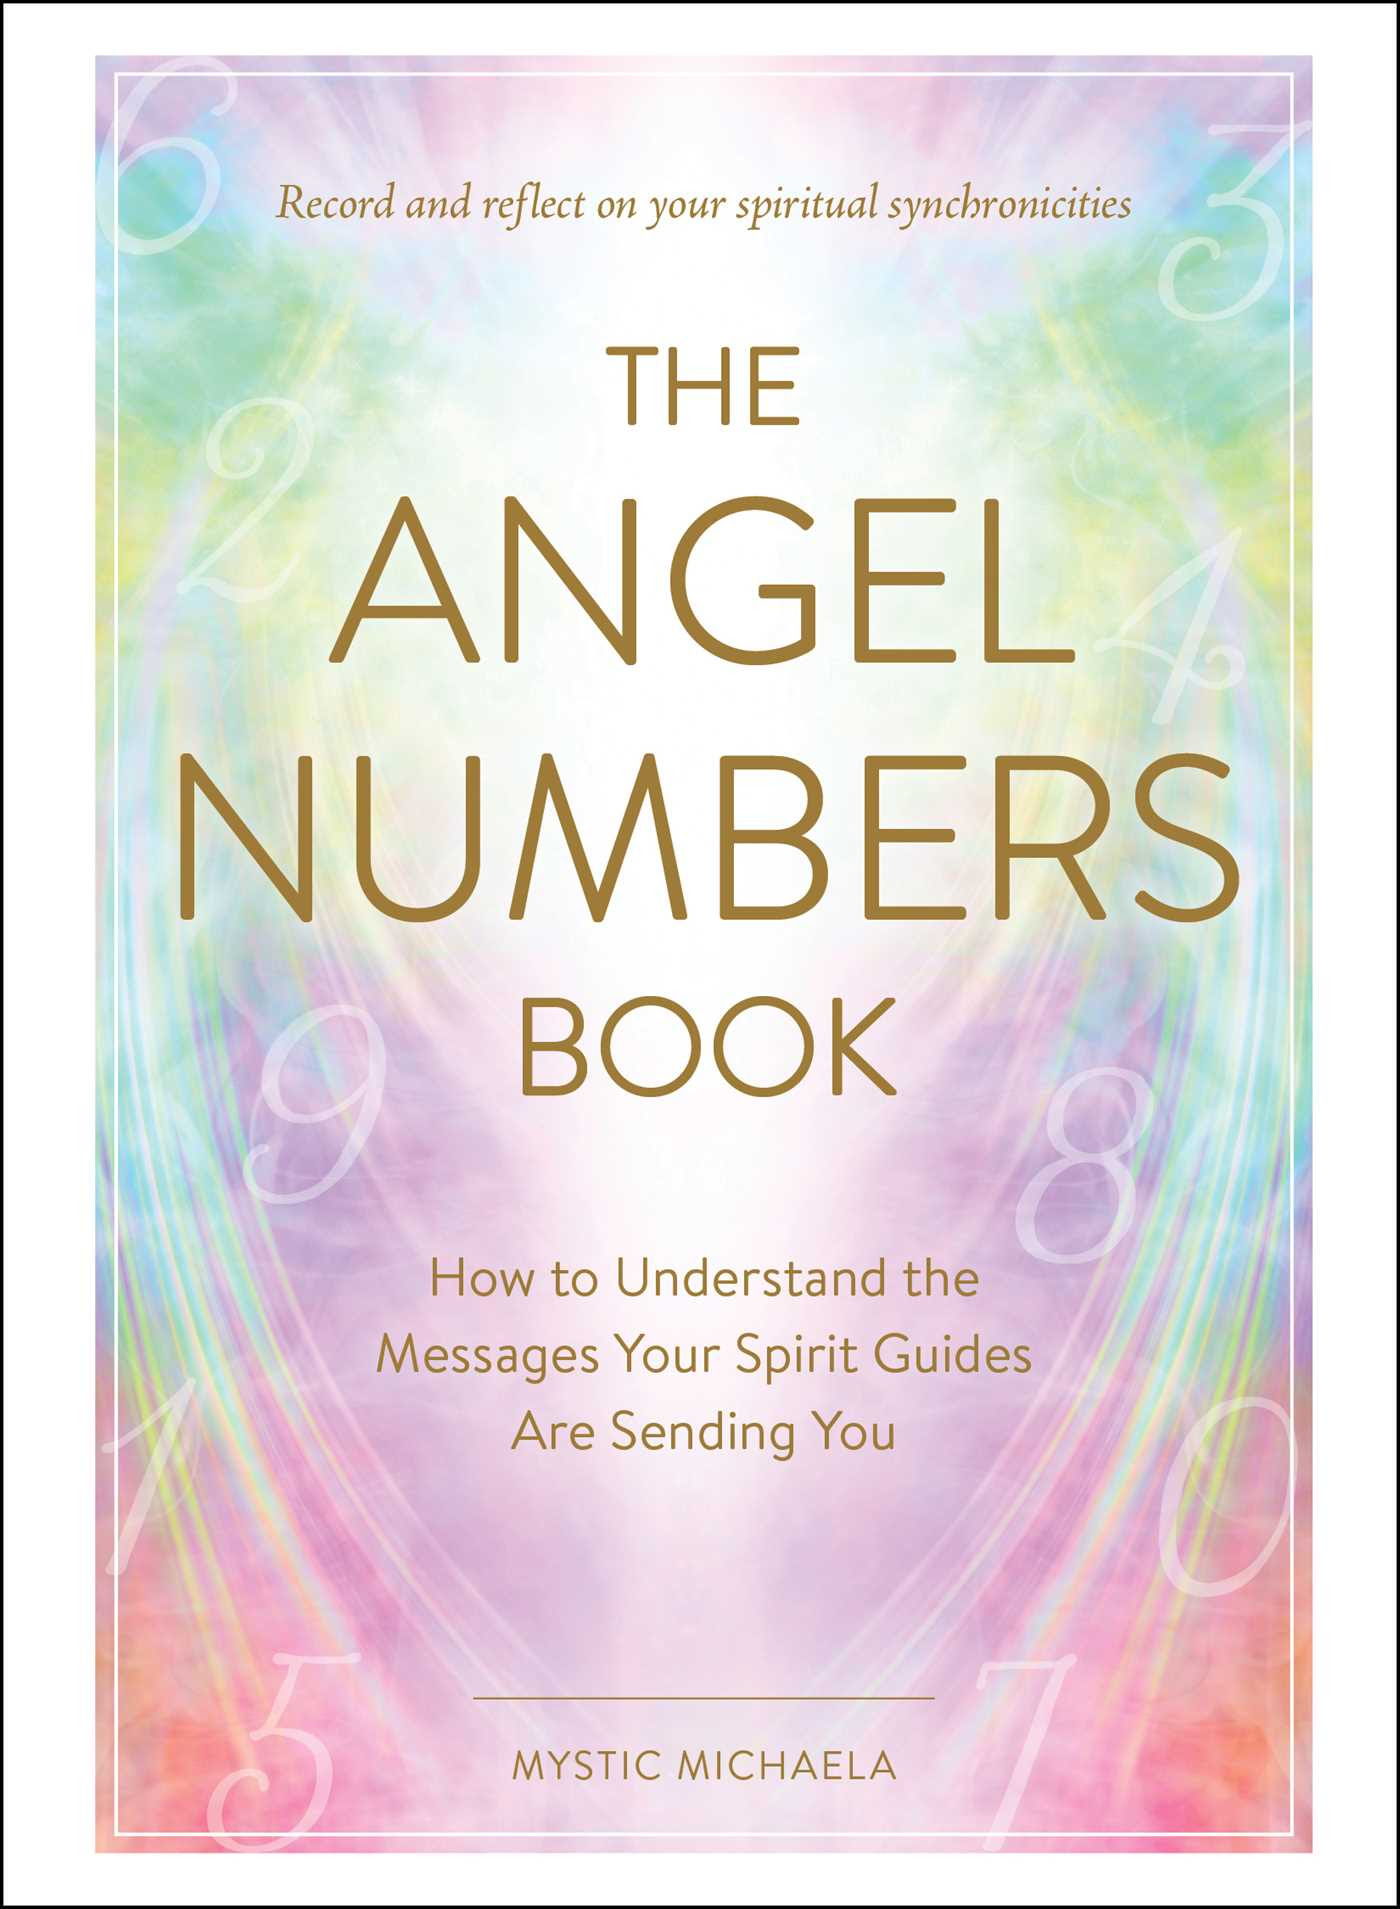 The Angel Numbers Book: How to Understand the Messages Your Spirit Guides Are Sending You PDF